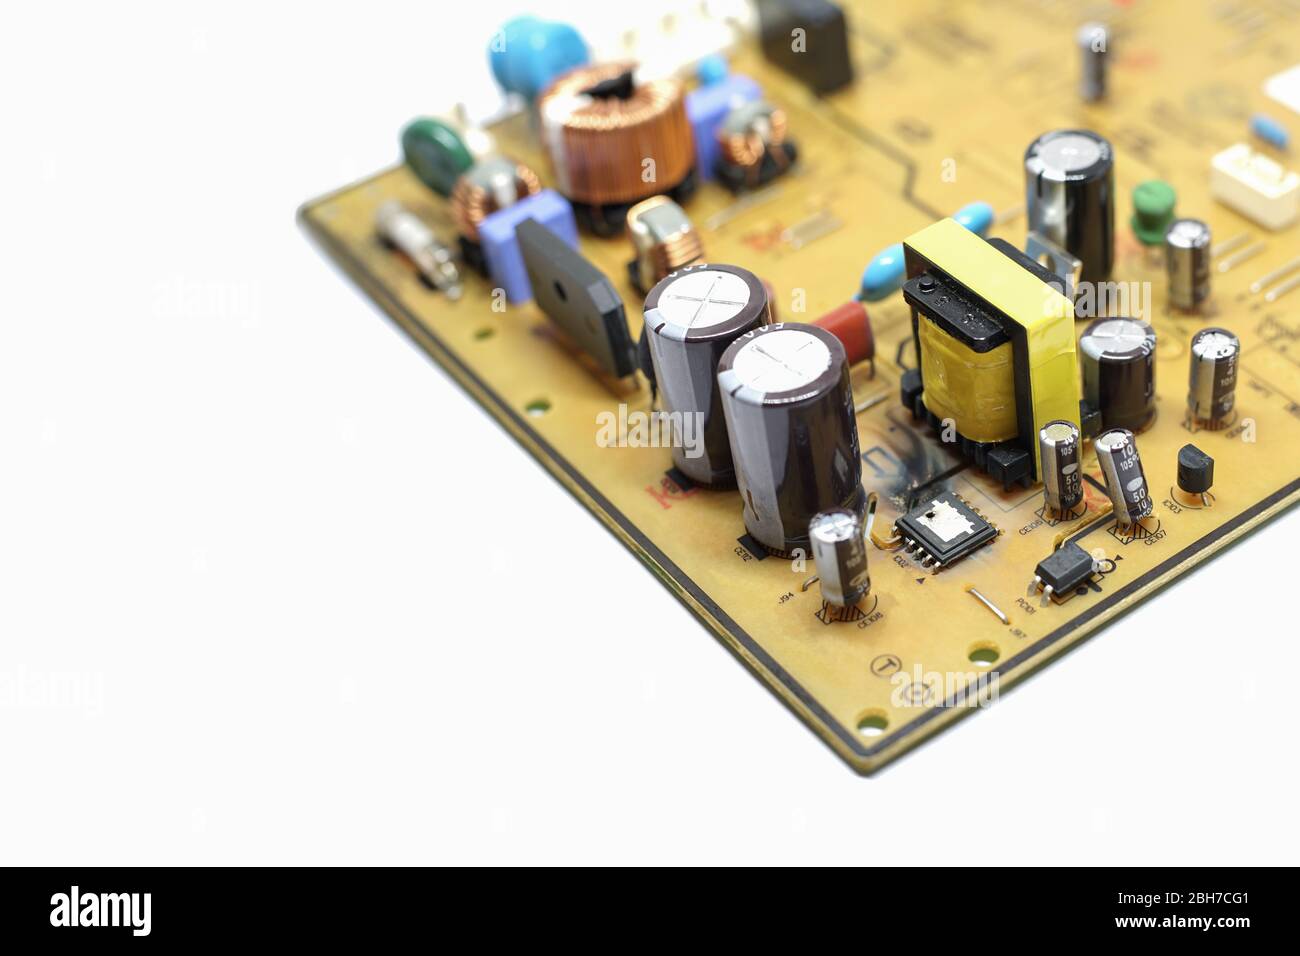 Closed up shot of Broken, damaged integrated circuit on printed circuit board. Stock Photo